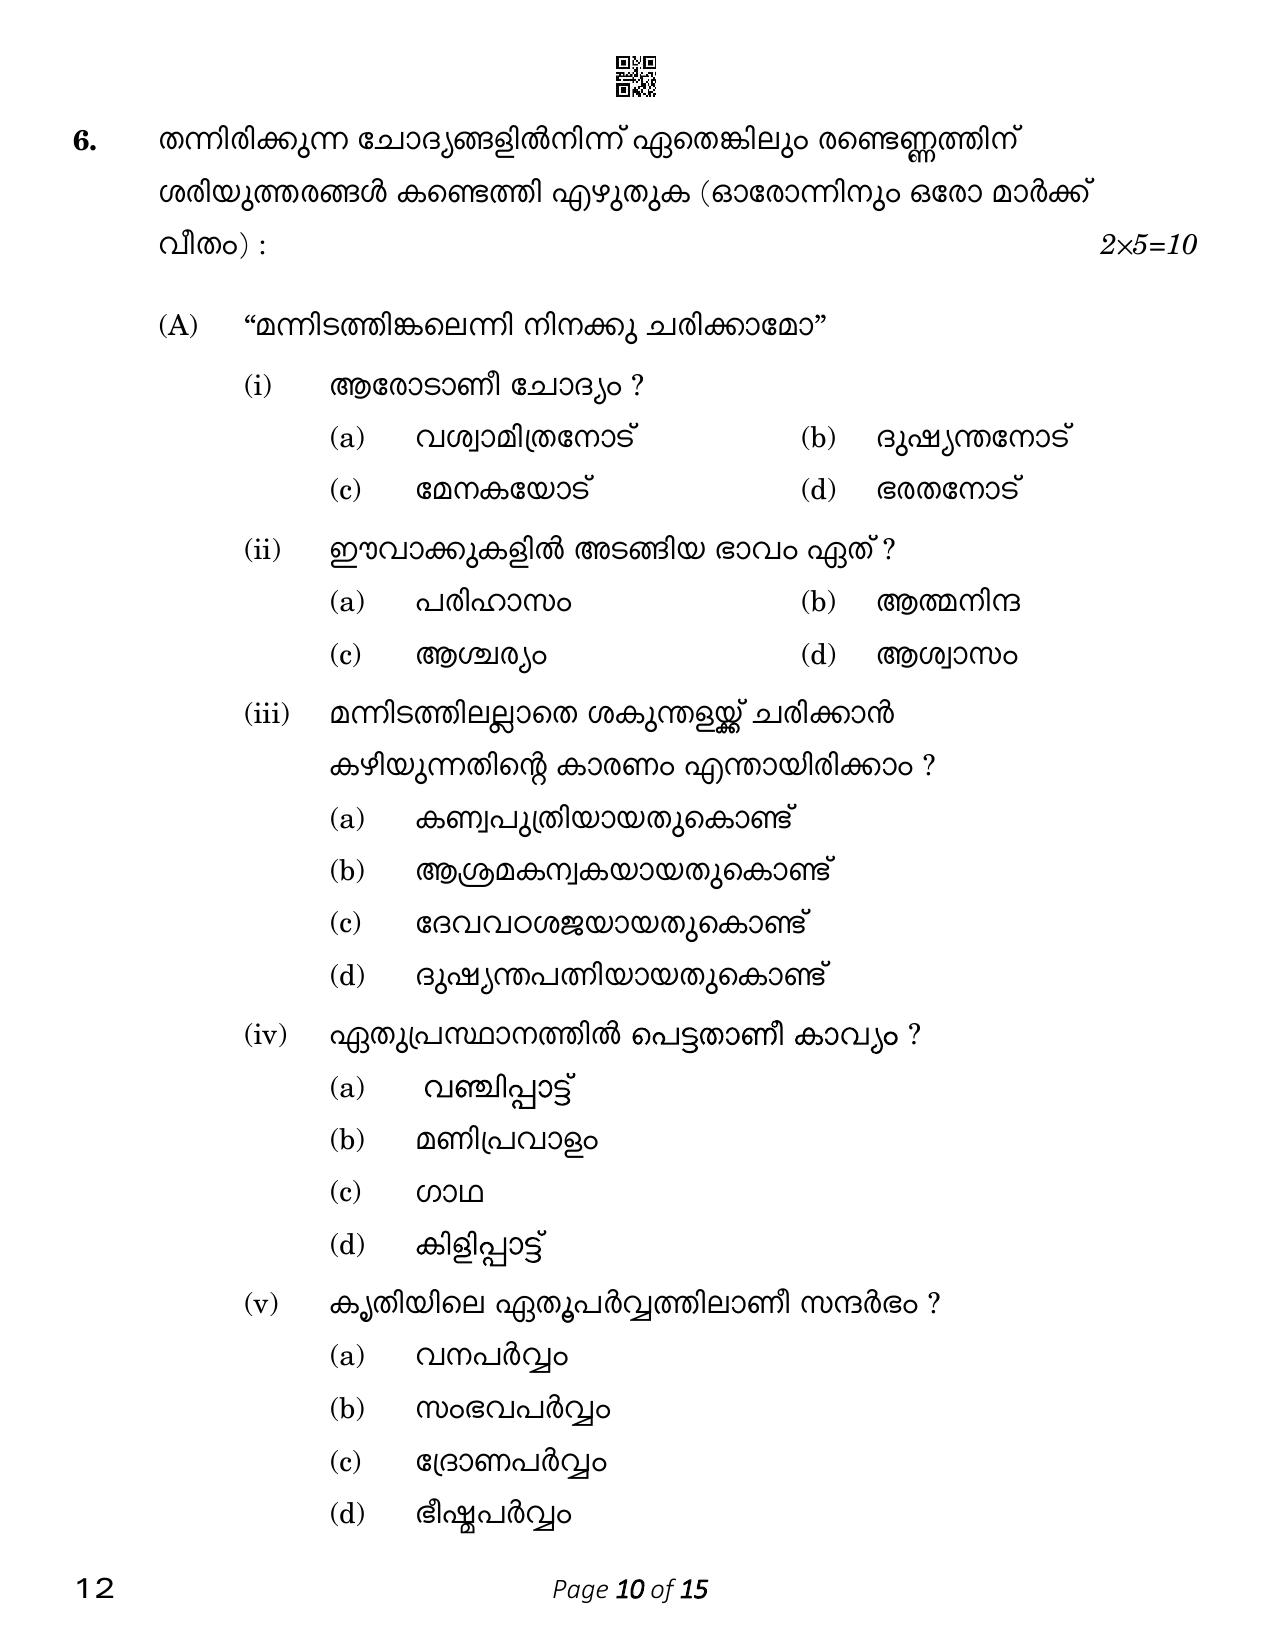 CBSE Class 12 Malayalam (Compartment) 2023 Question Paper - Page 10